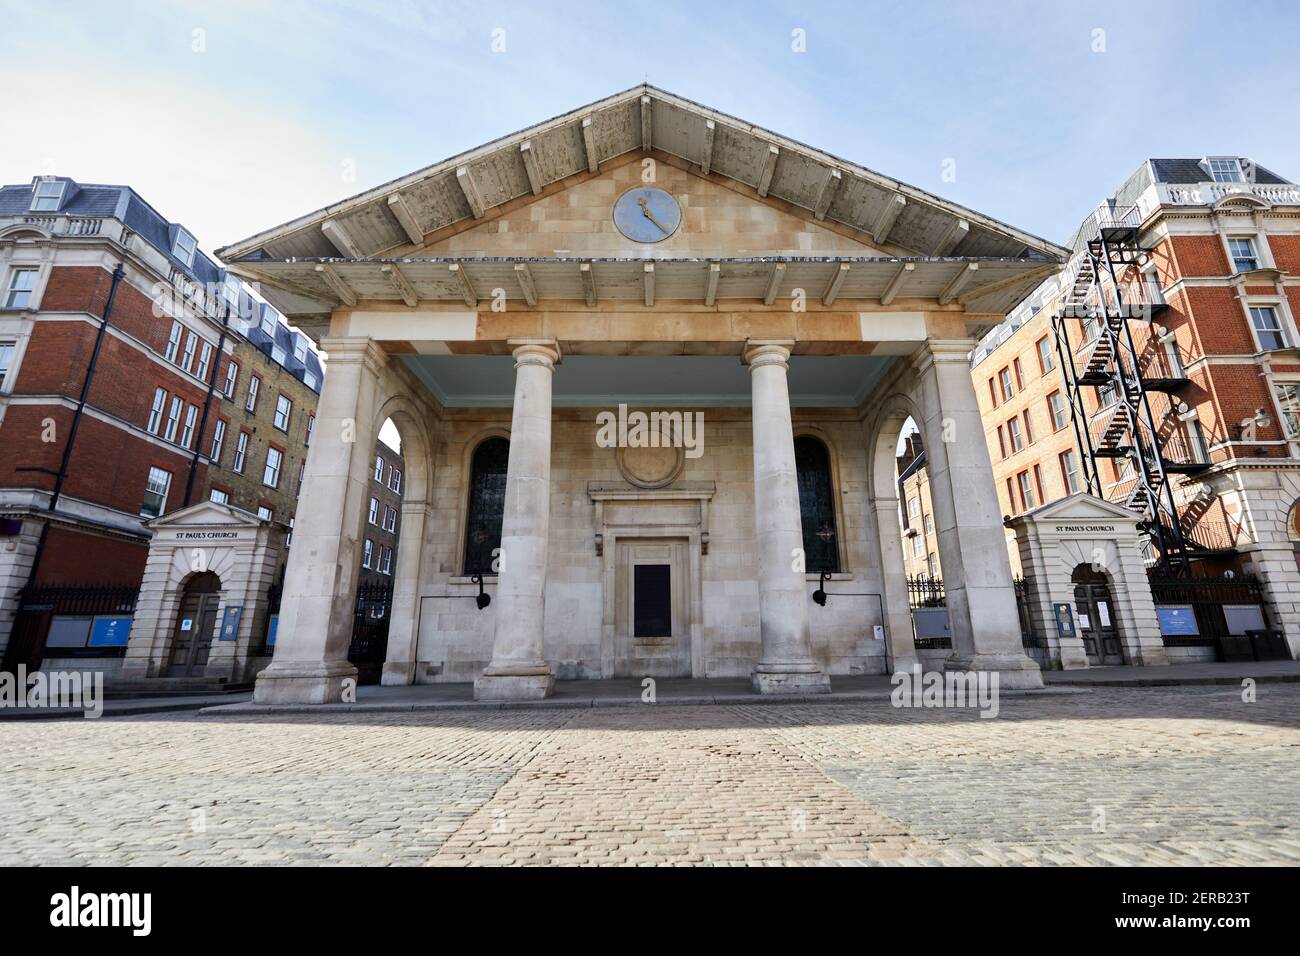 London, U.K. - 23 Feb 2021: The facade and front area of St. Paul's Church in Covent Garden. The space in front of the portico normally bustles with street entertainers and visitors but has been deserted during coronavirus lockdowns. Stock Photo